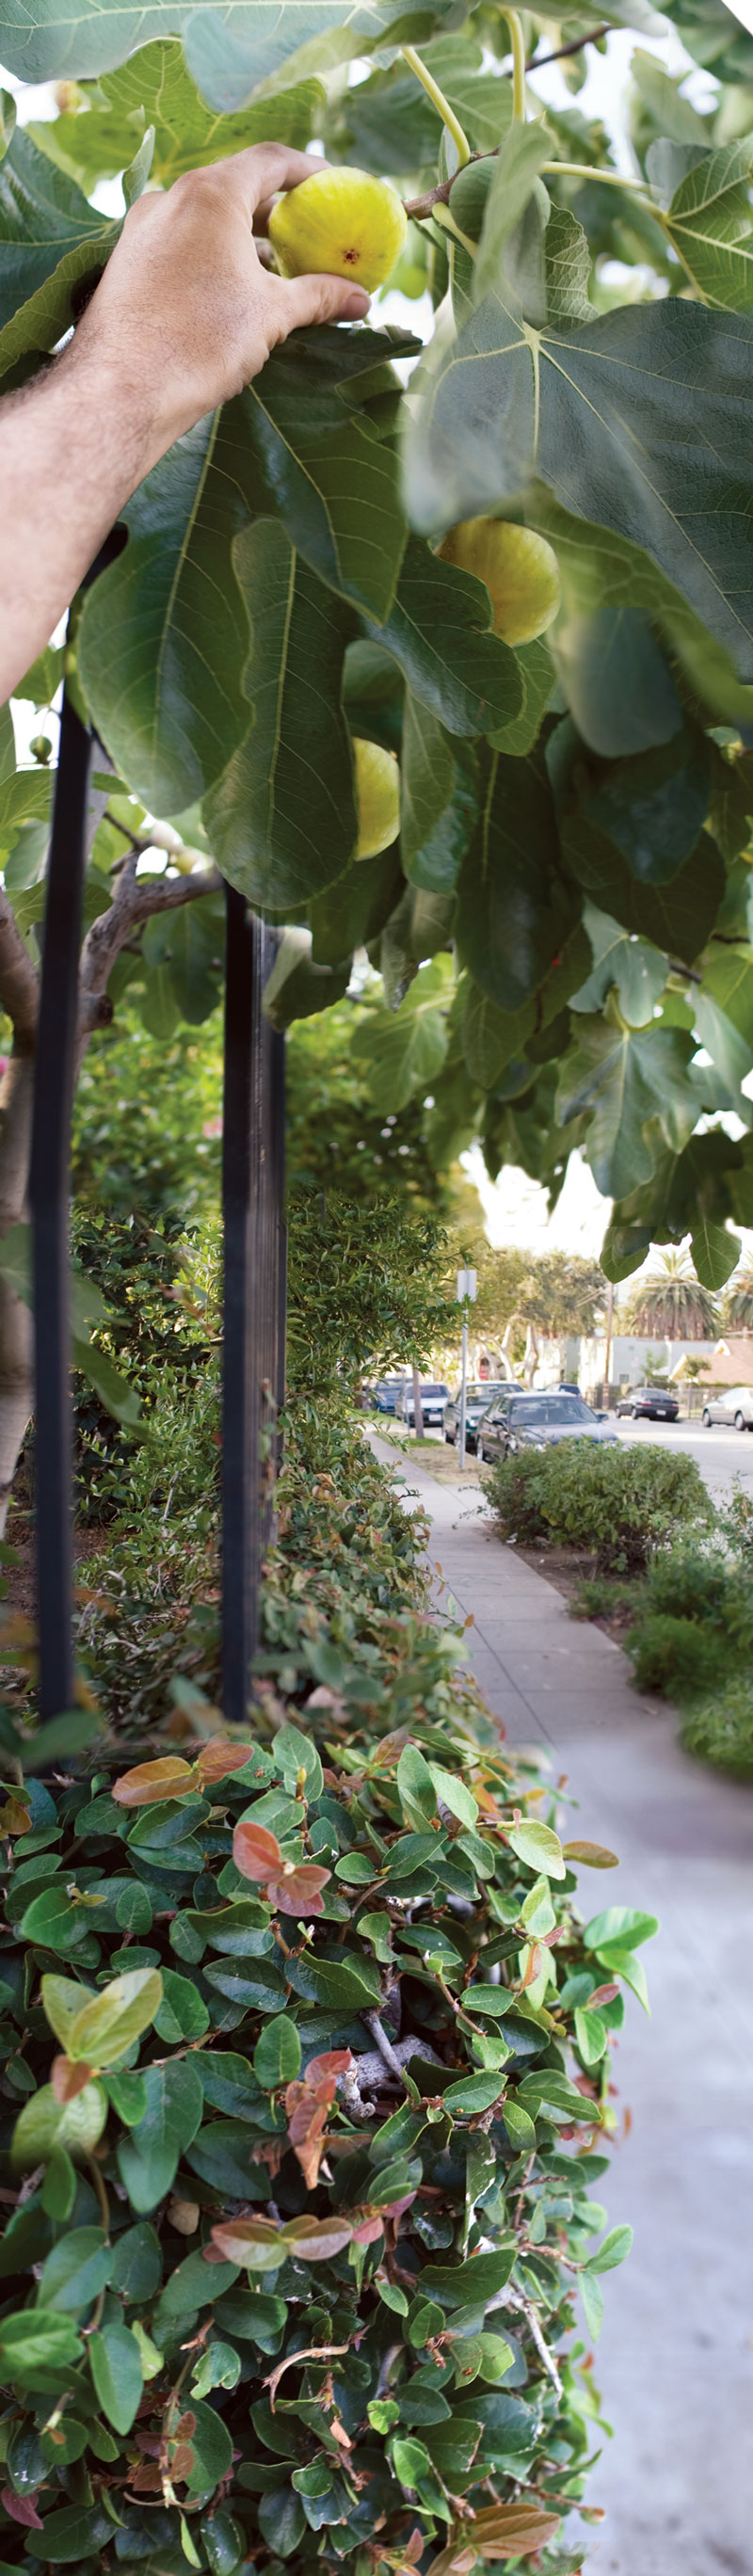 Figs on the border of private property, Talmadge Street, Los Angeles. An
example of half-public, half-private fruit.